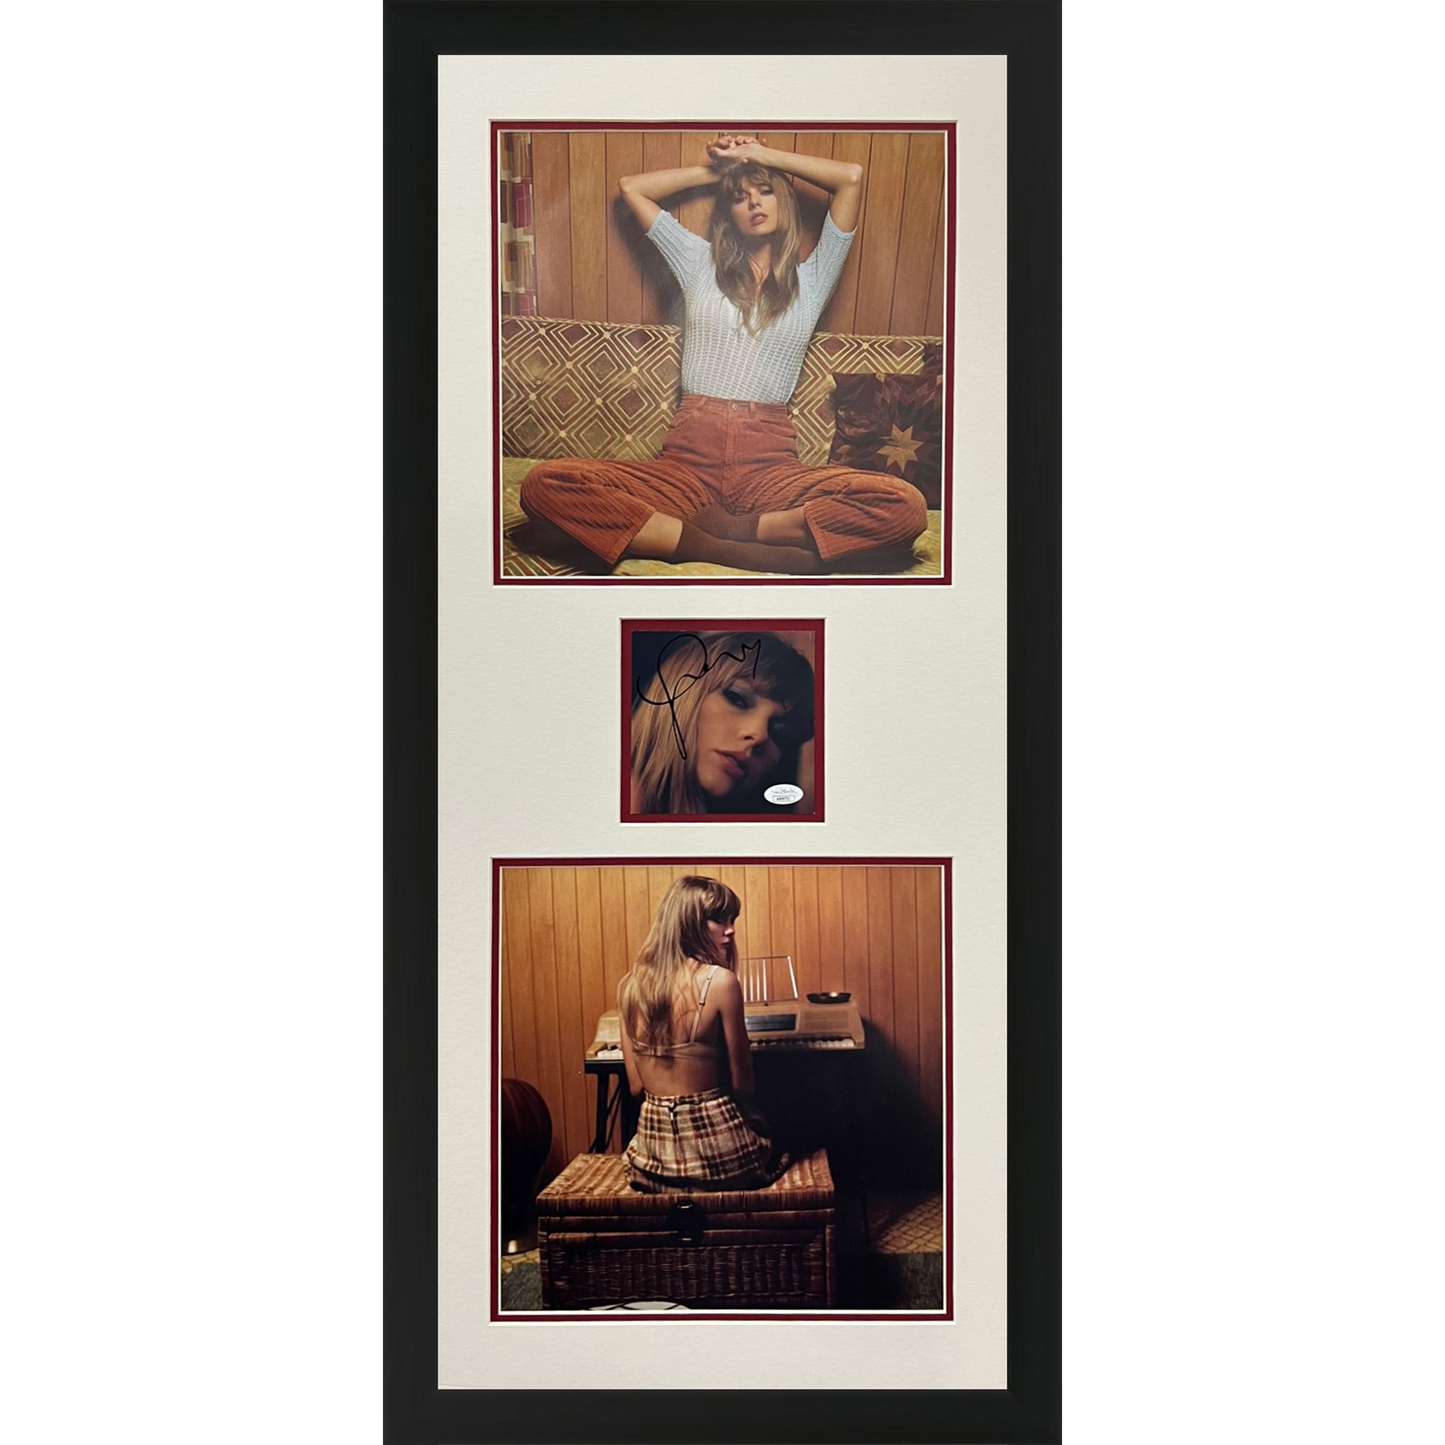 Taylor Swift Autographed Midnights Limited Edition CD Insert Deluxe Framed with 2 Large Photos - JSA